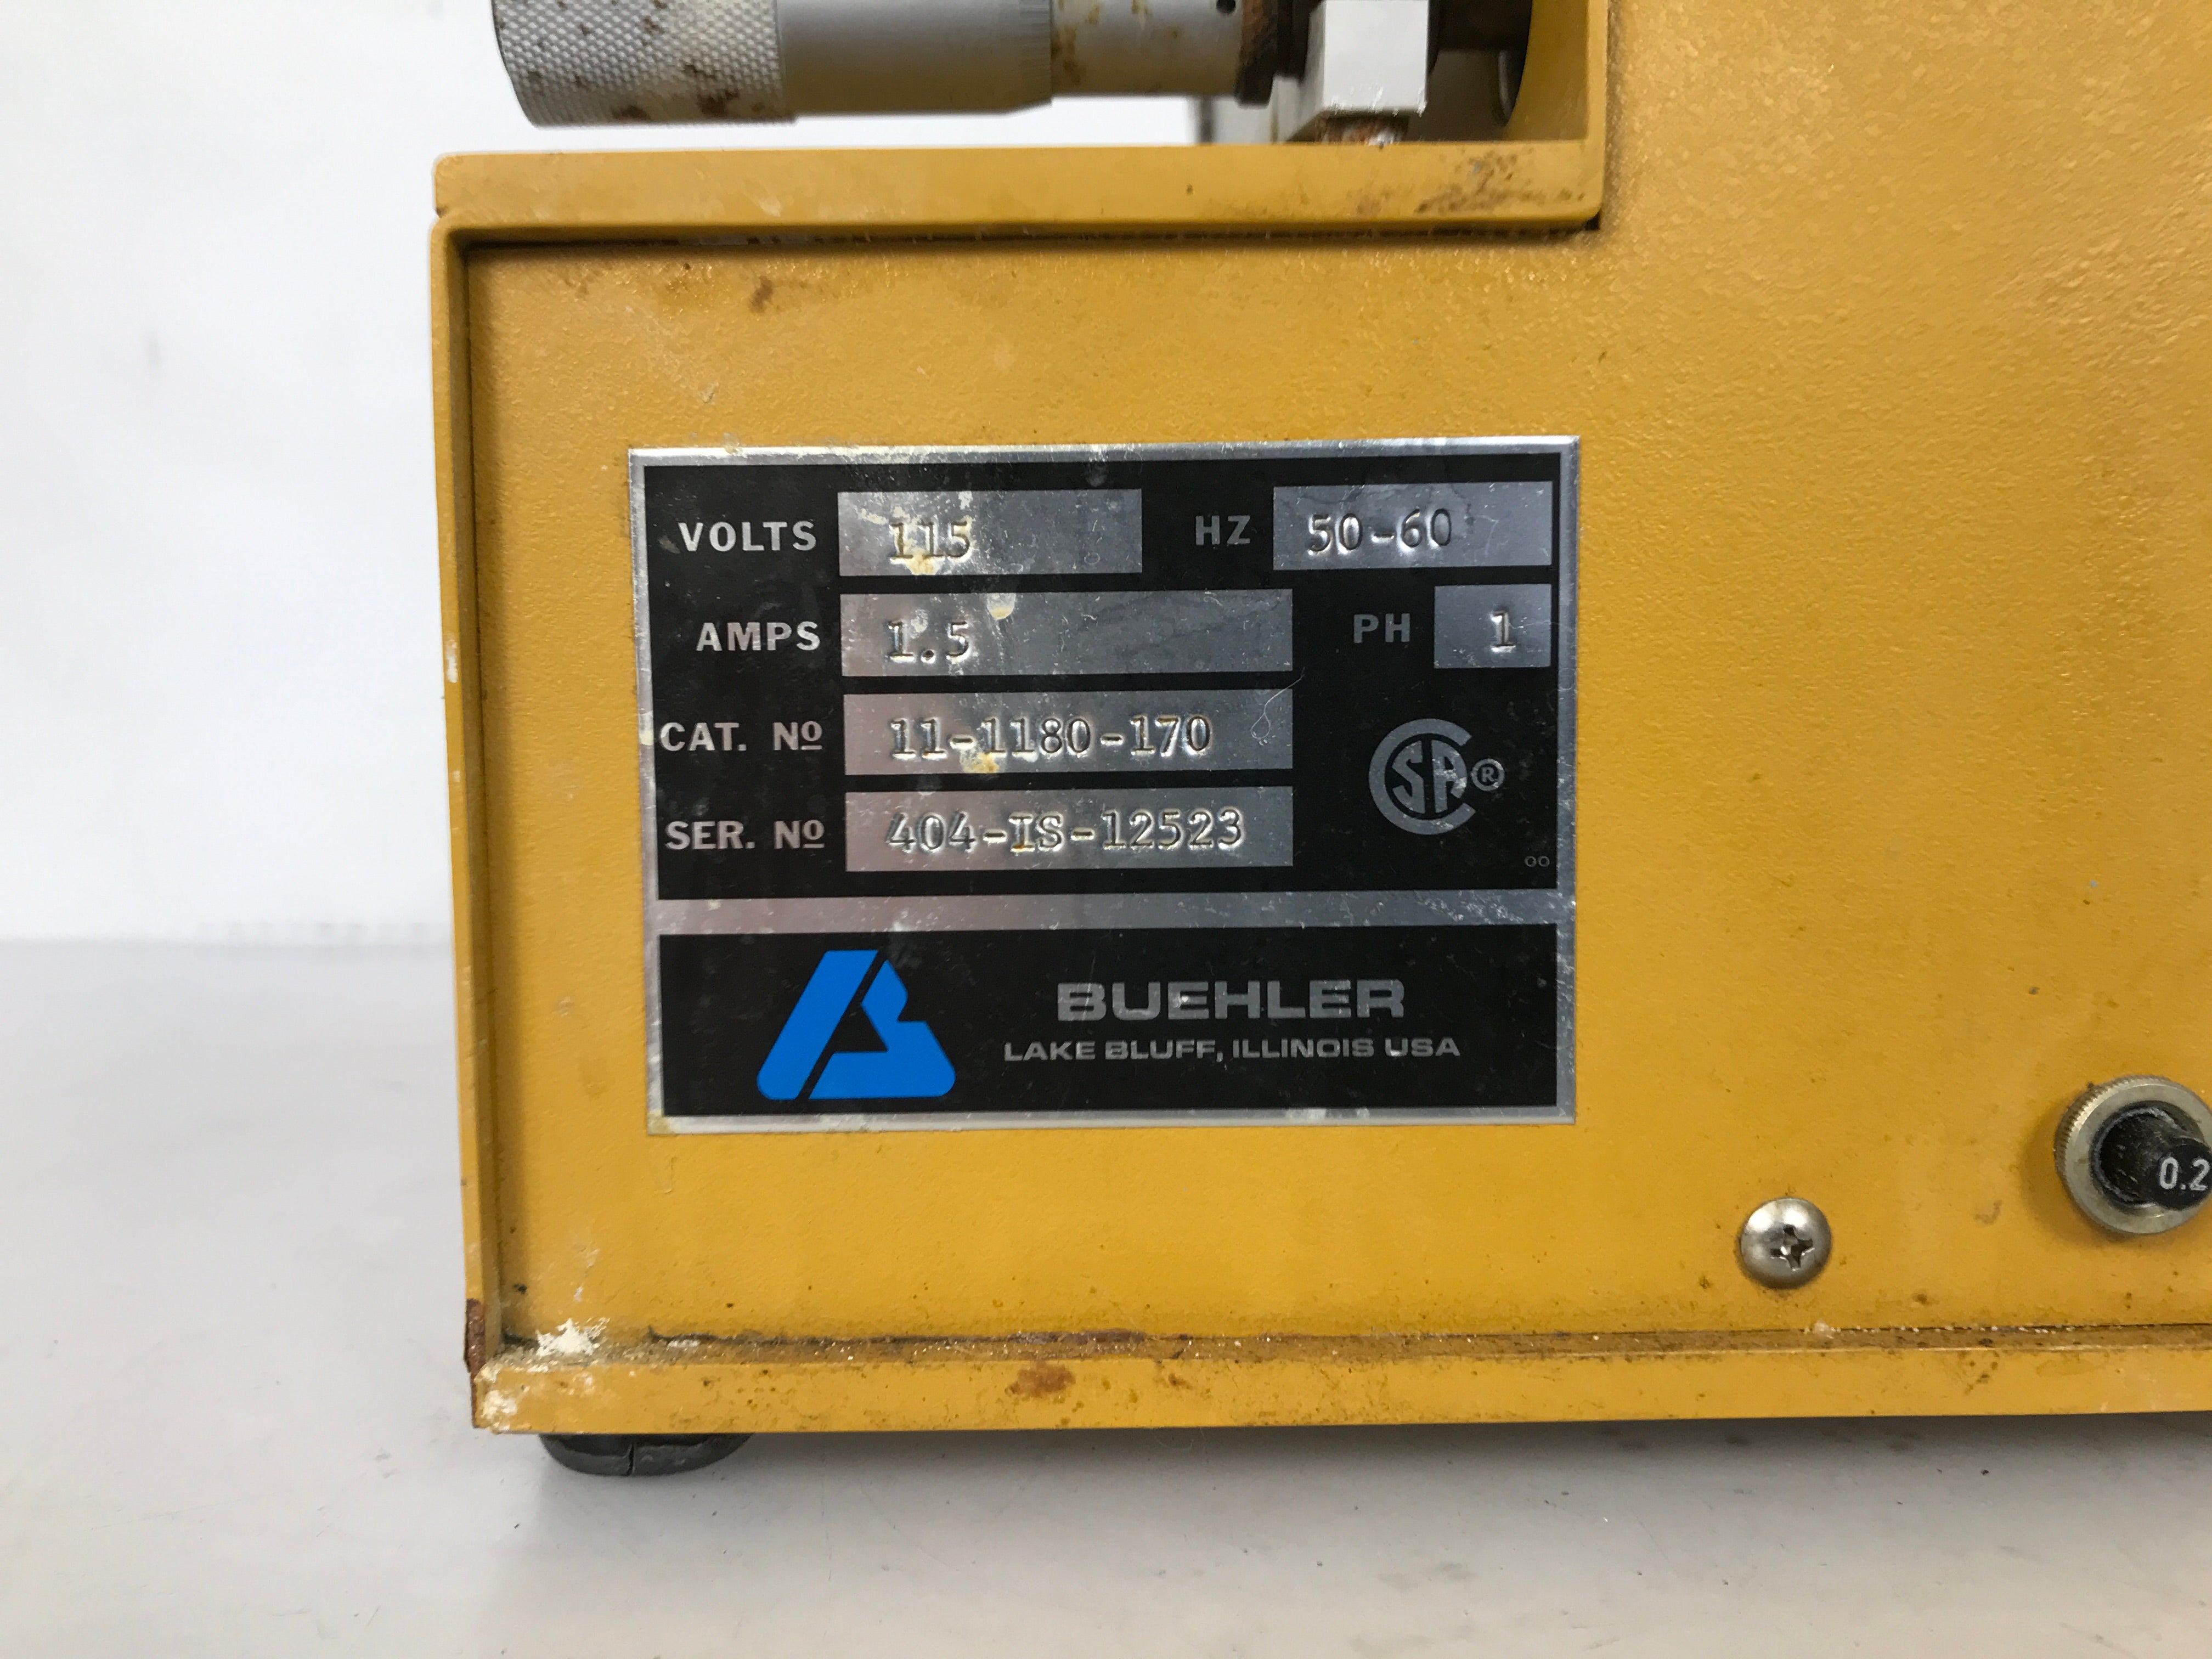 Buehler IsoMet Low Speed Saw 11-1180-170 *For Parts or Repair*